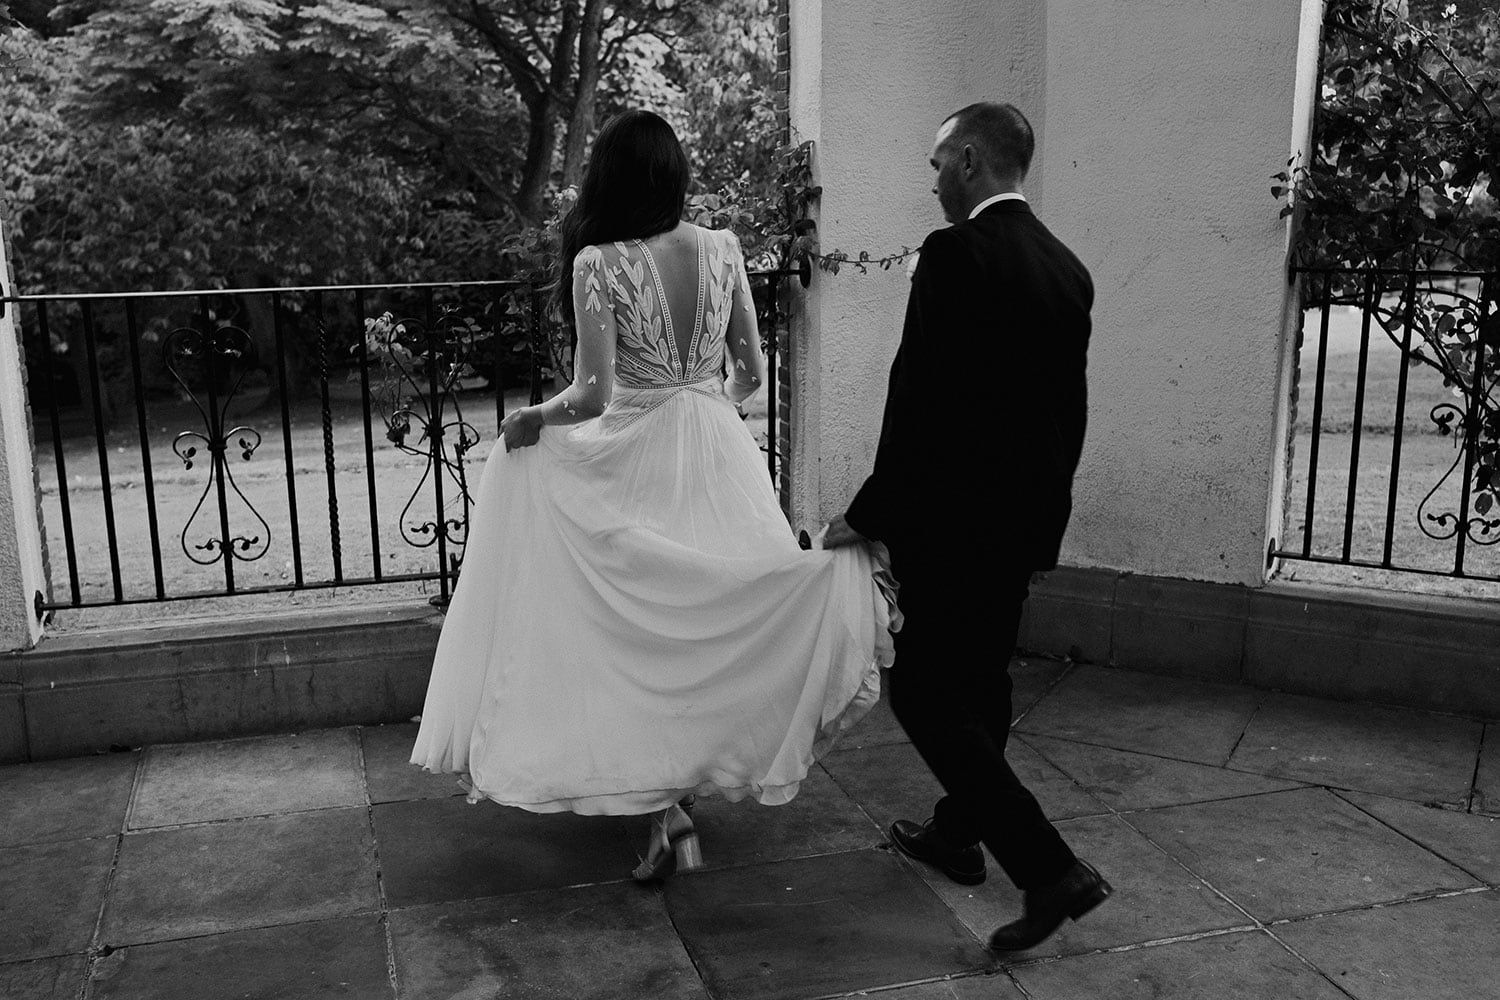 Artistic black and white image of a bride walking and her Groom carrying the train of her dress